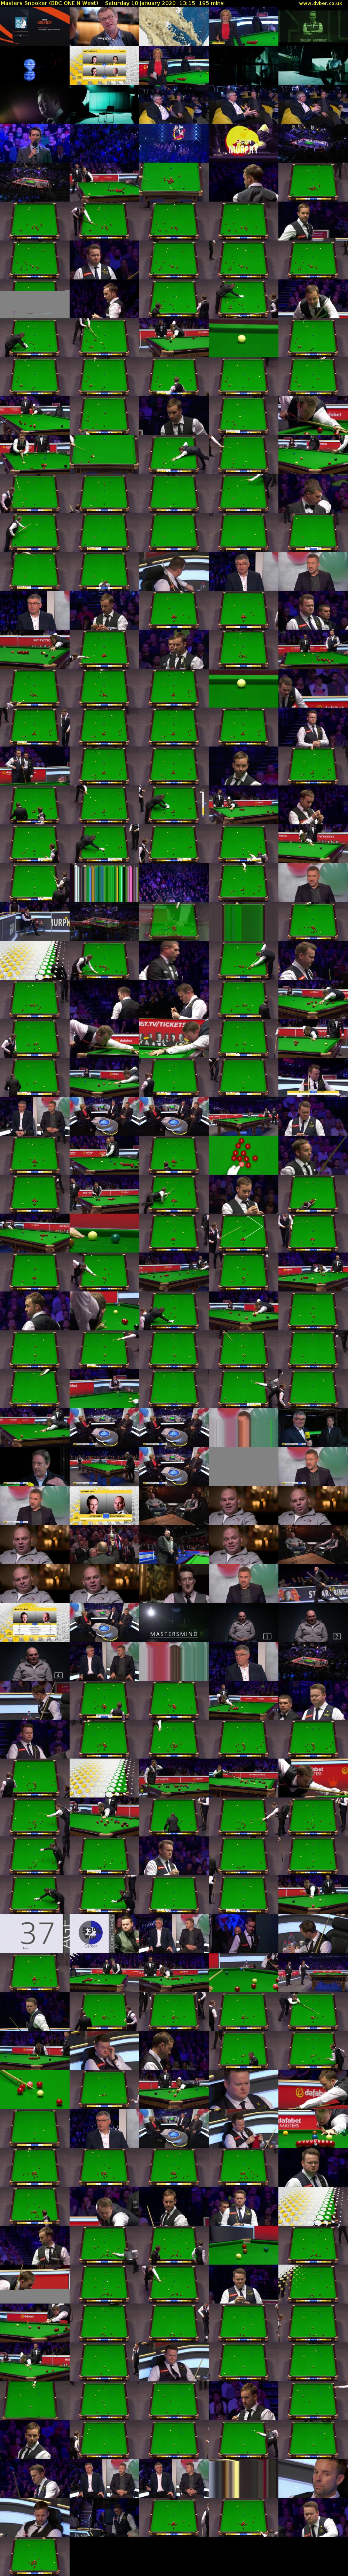 Masters Snooker (BBC ONE N West) Saturday 18 January 2020 13:15 - 16:30